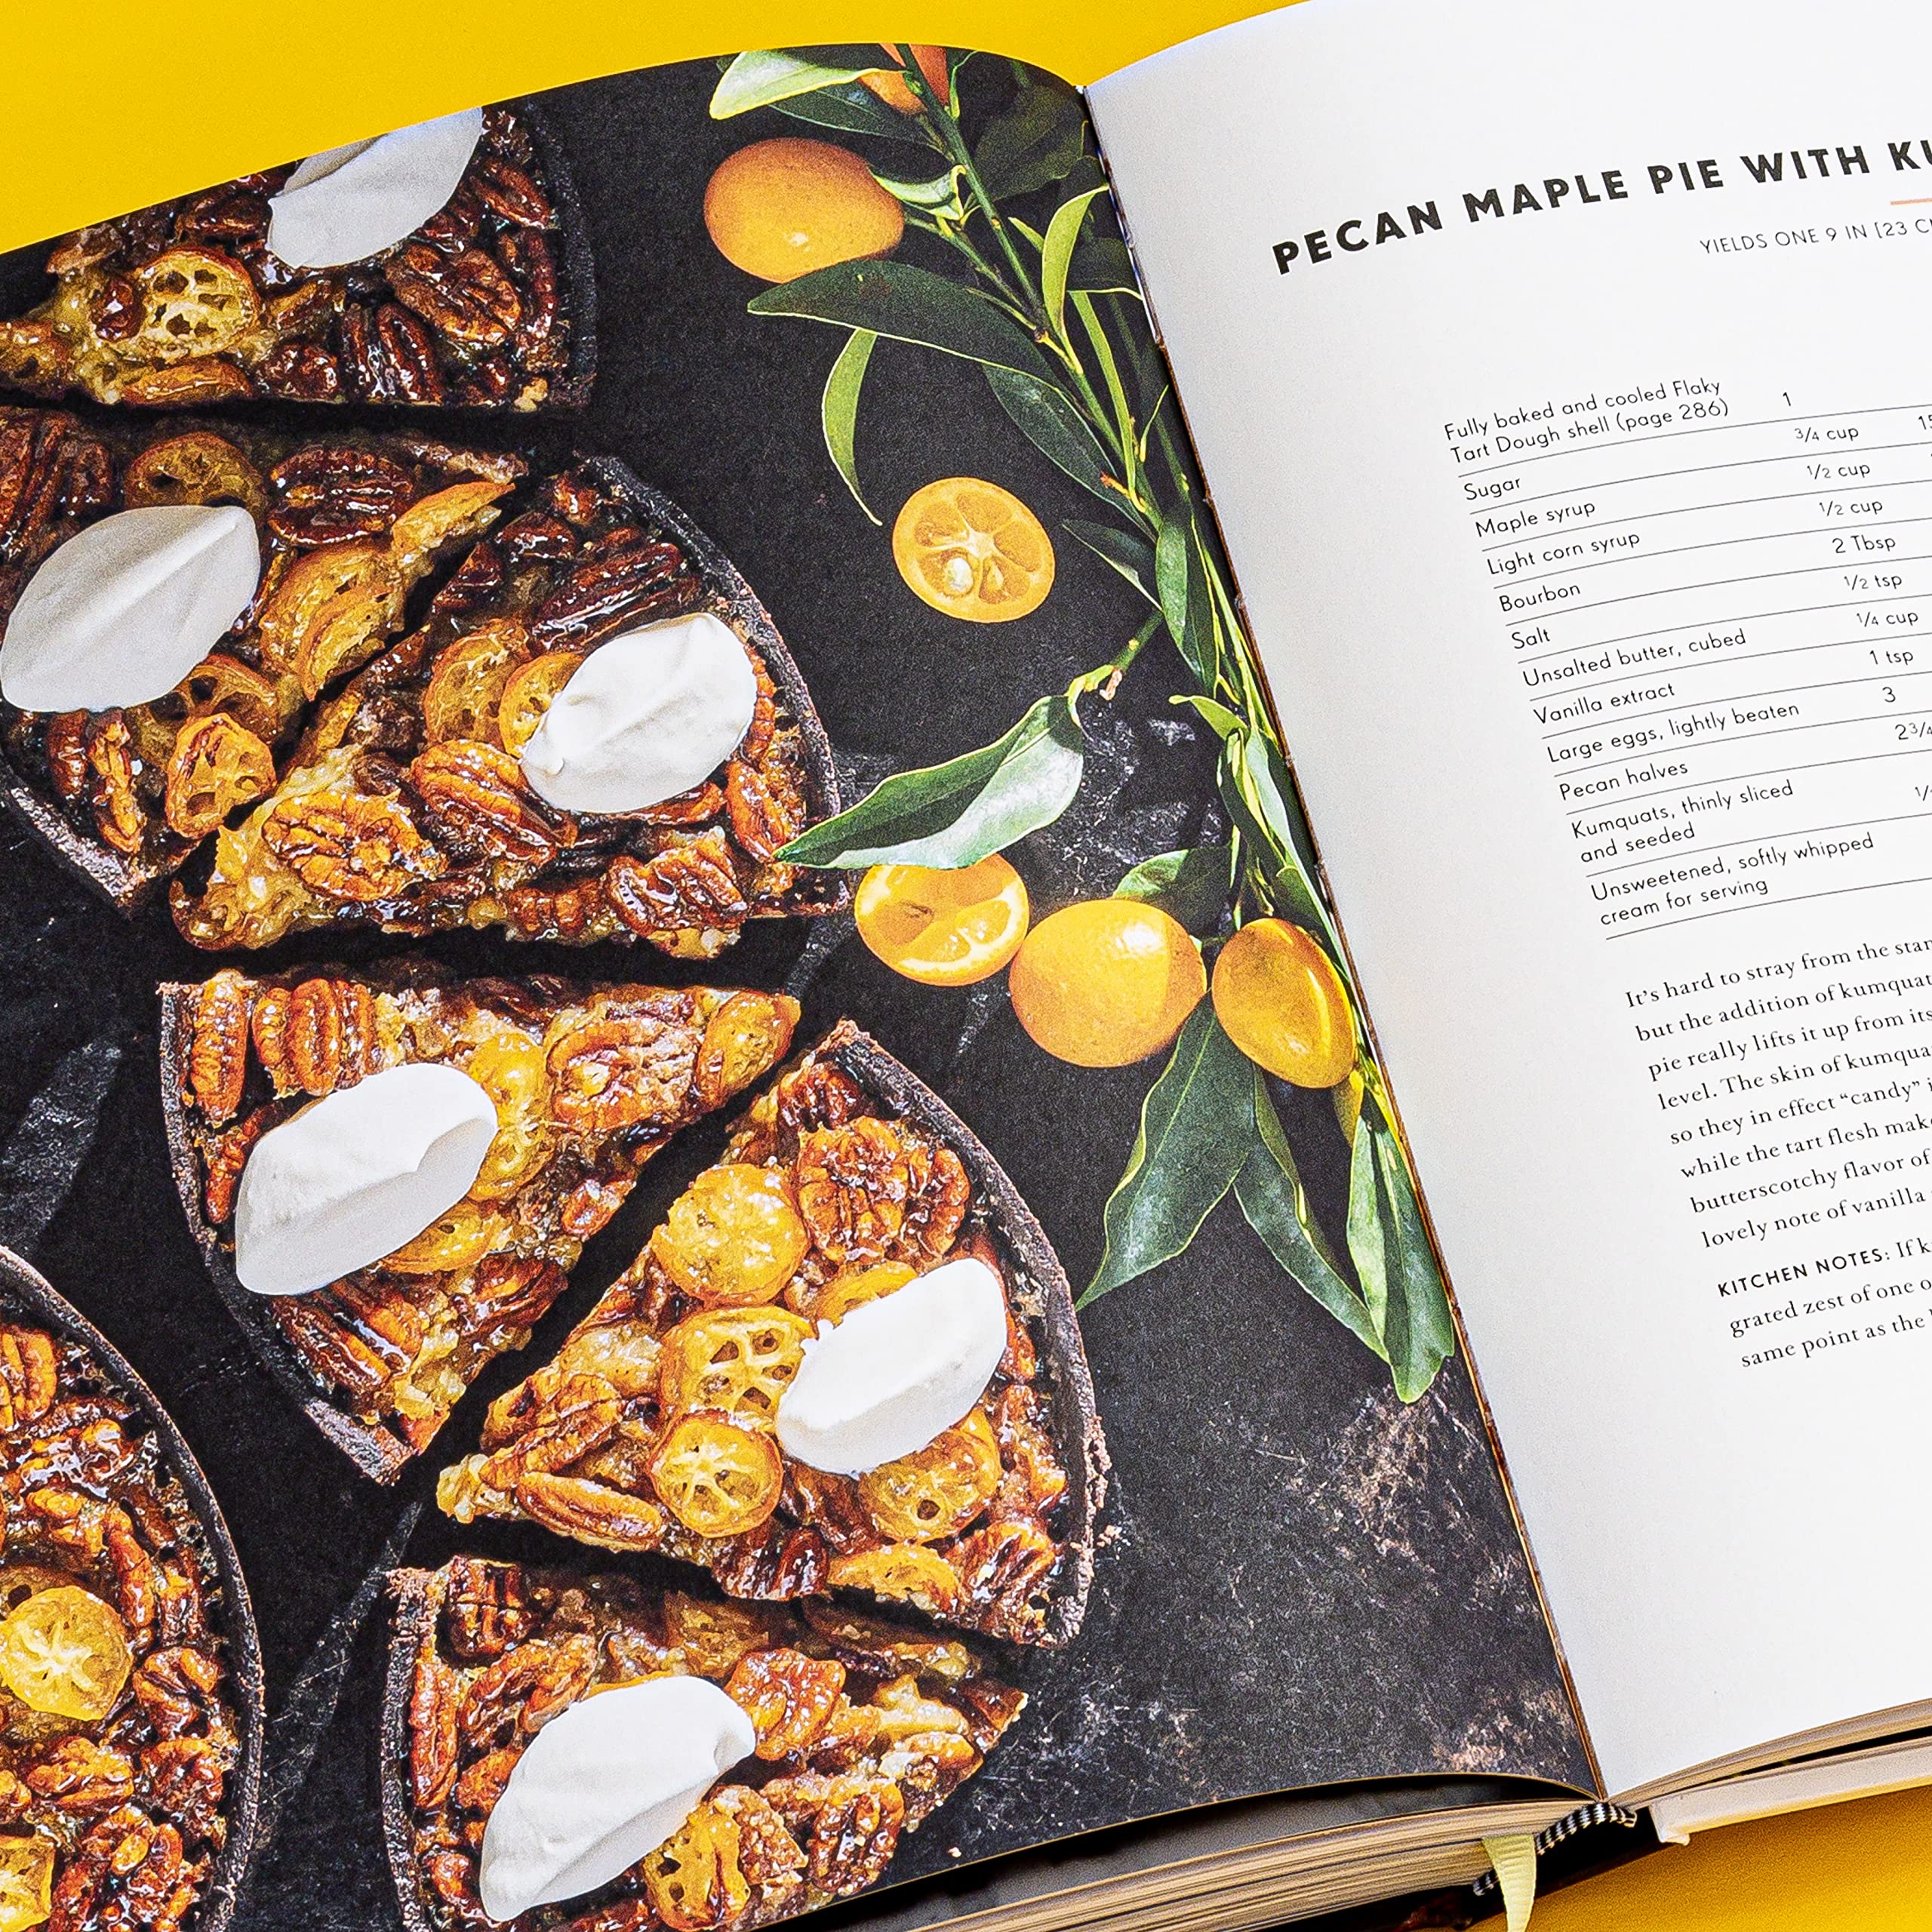 Tartine: A Classic Revisited68 All-New Recipes + 55 Updated Favorites